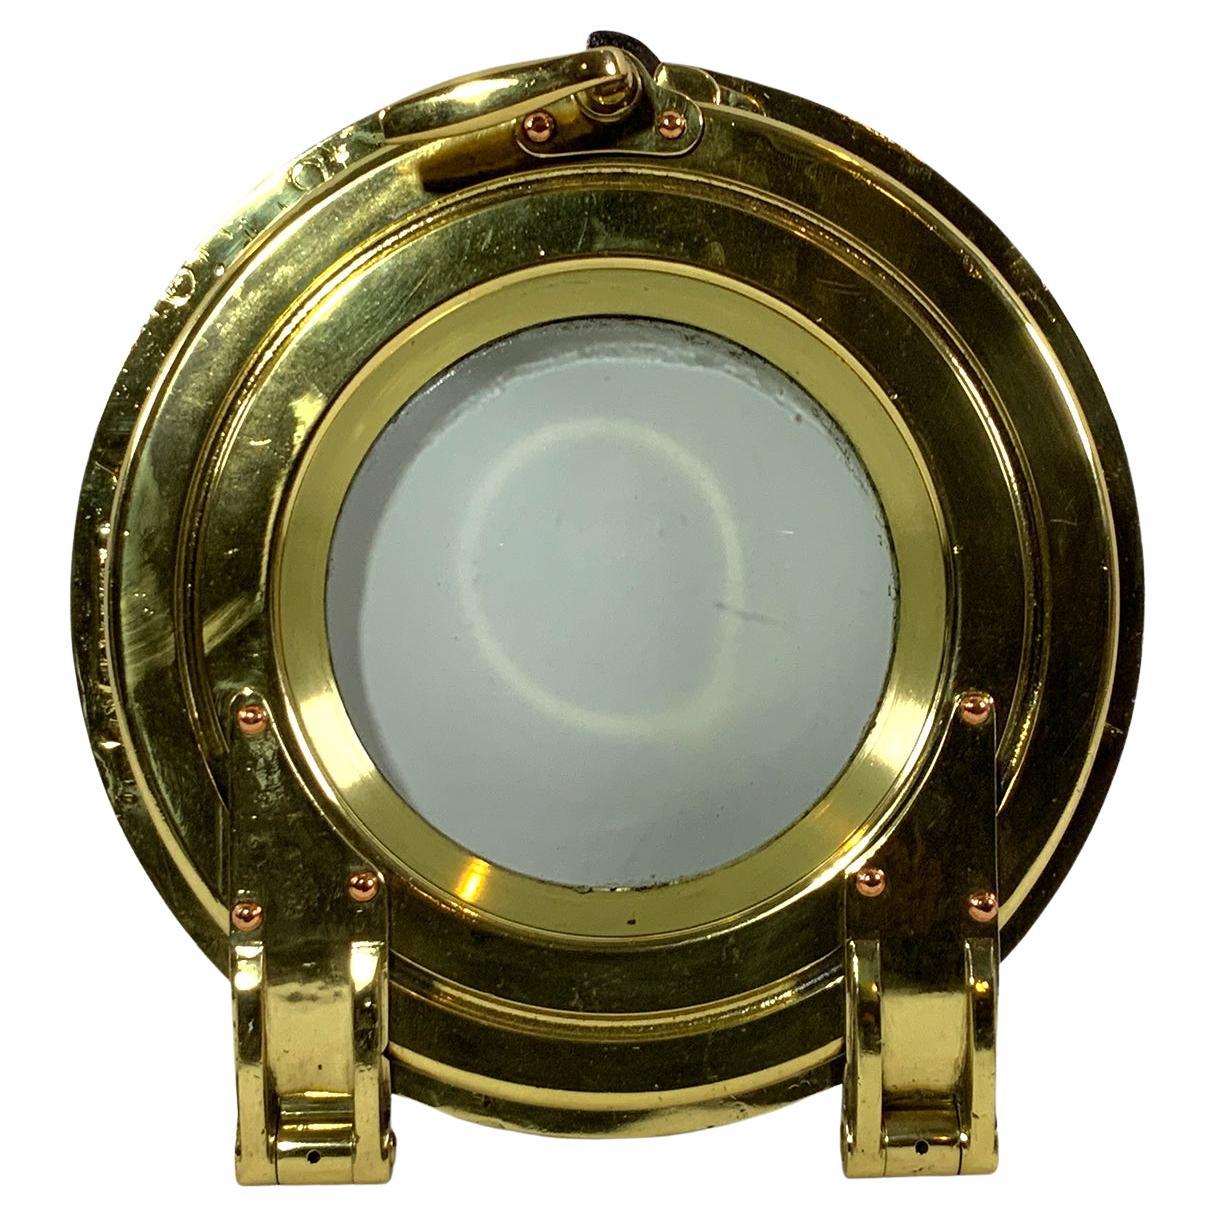 Yacht Porthole Solid Brass Highest Quality For Sale